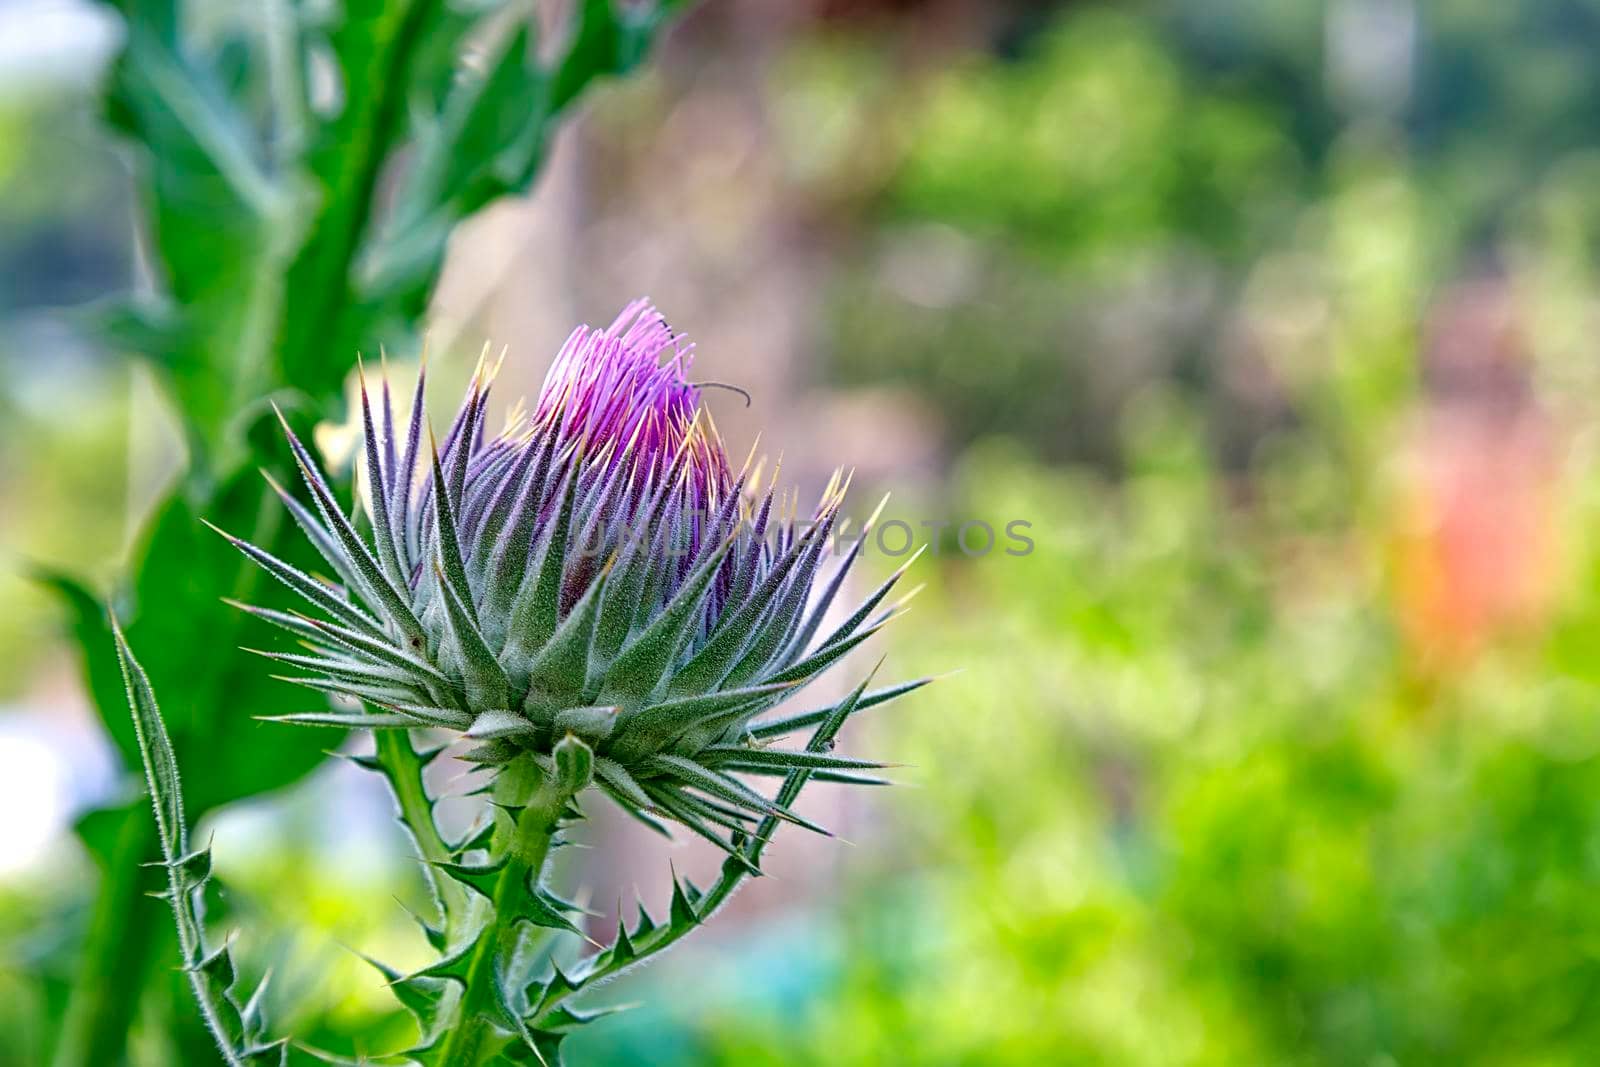 Wild-growing thistle on green blurred background. Onopordum acanthium (cotton thistle, Scotch thistle, or Scottish thistle) by EdVal